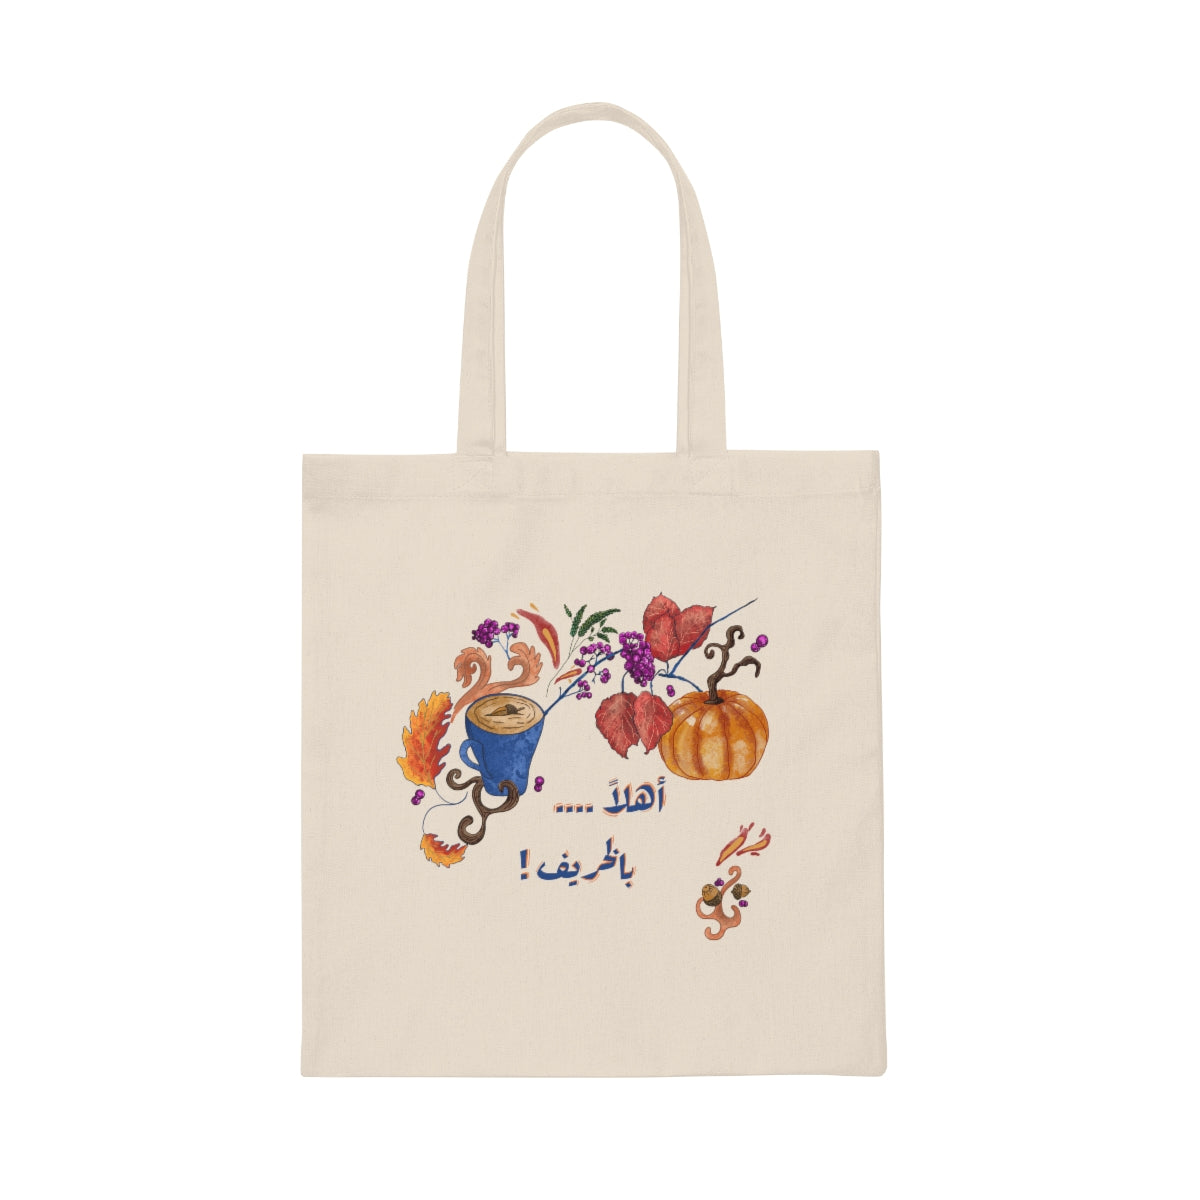 Welcome Autumn/اهلا بالخريف - natural canvas Tote bag- Arabic